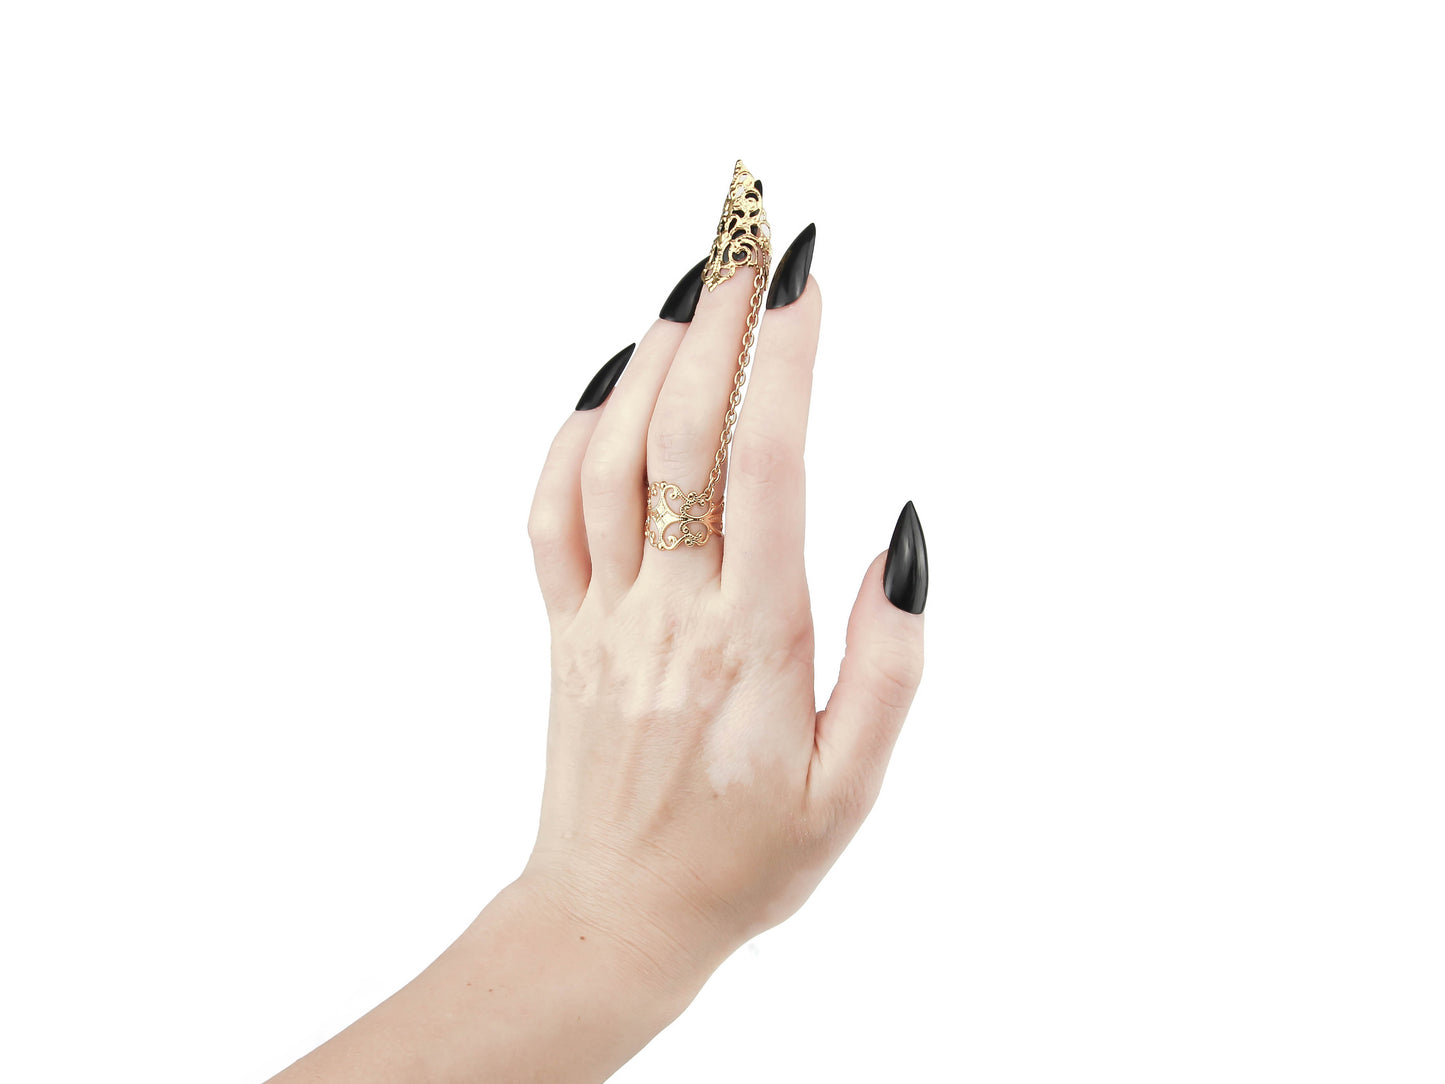 An avant-garde gold claw ring from Myril Jewels, featuring intricate gothic-inspired filigree design that exudes dark elegance. The chain connects a detailed ring to a matching claw over the nail, embodying the brand's commitment to sophisticated, futuristic gothic style. Ideal for those who appreciate gothic-chic, Neo Gothic, and Witchcore aesthetics, this piece is perfect for everyday wear, Halloween, or as a statement accessory for rave parties and festivals.